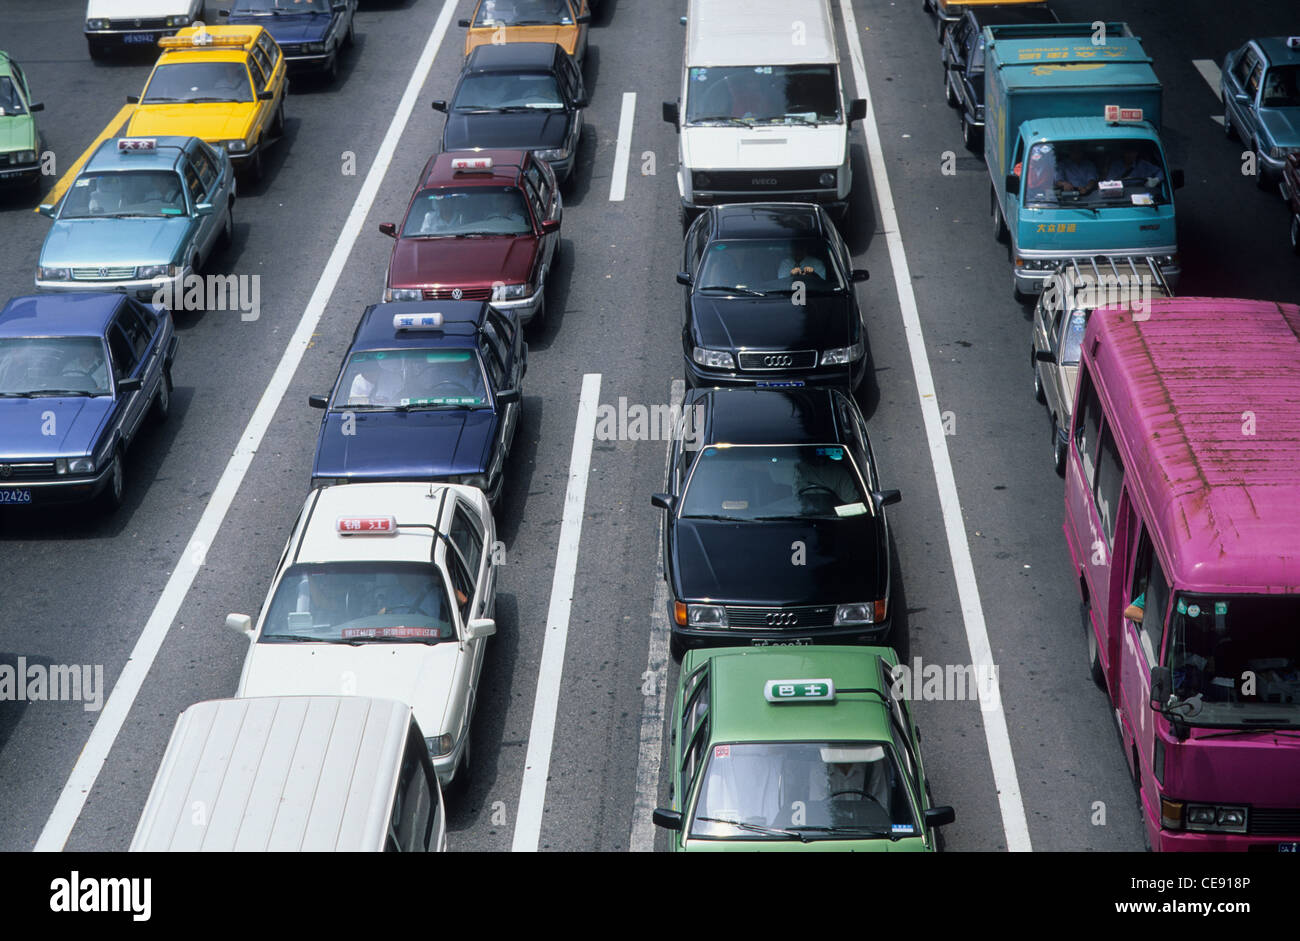 China, Shanghai, traffic at a standstill showing some locally made cars e.g. VW Santana, Audi 100. Stock Photo